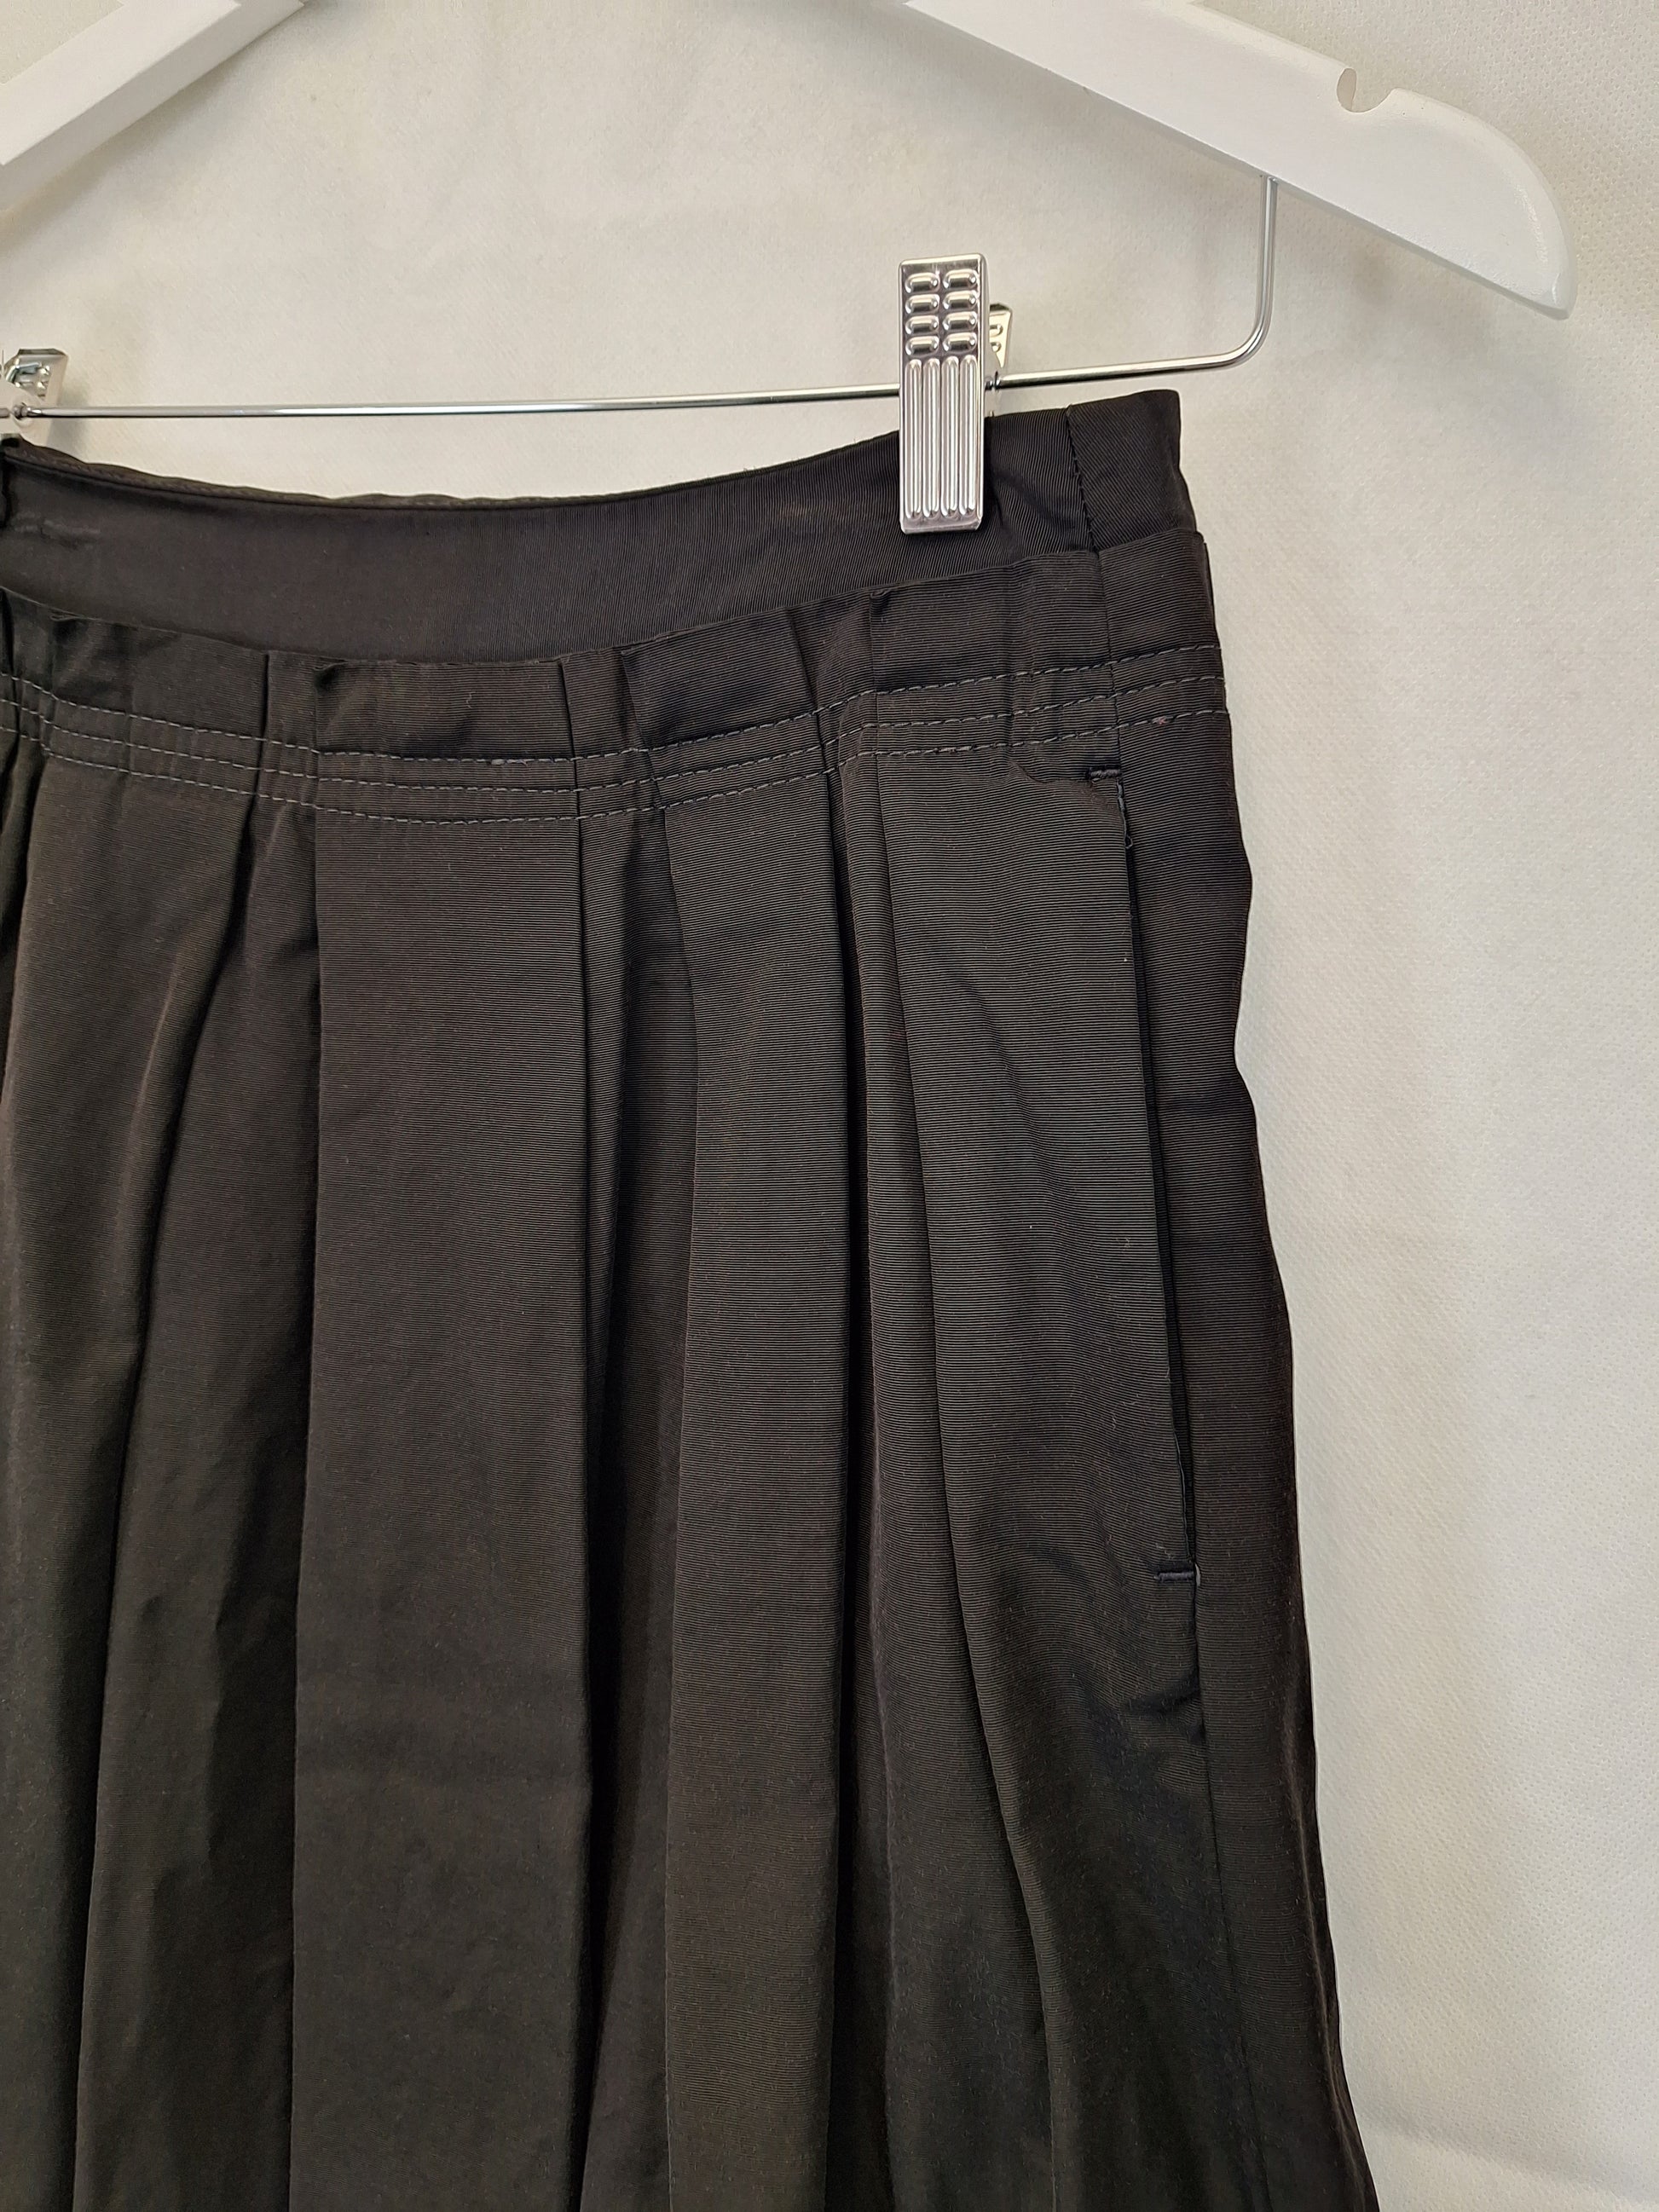 Cue Pleated Classic Evening Midi Skirt Size 8 by SwapUp-Online Second Hand Store-Online Thrift Store